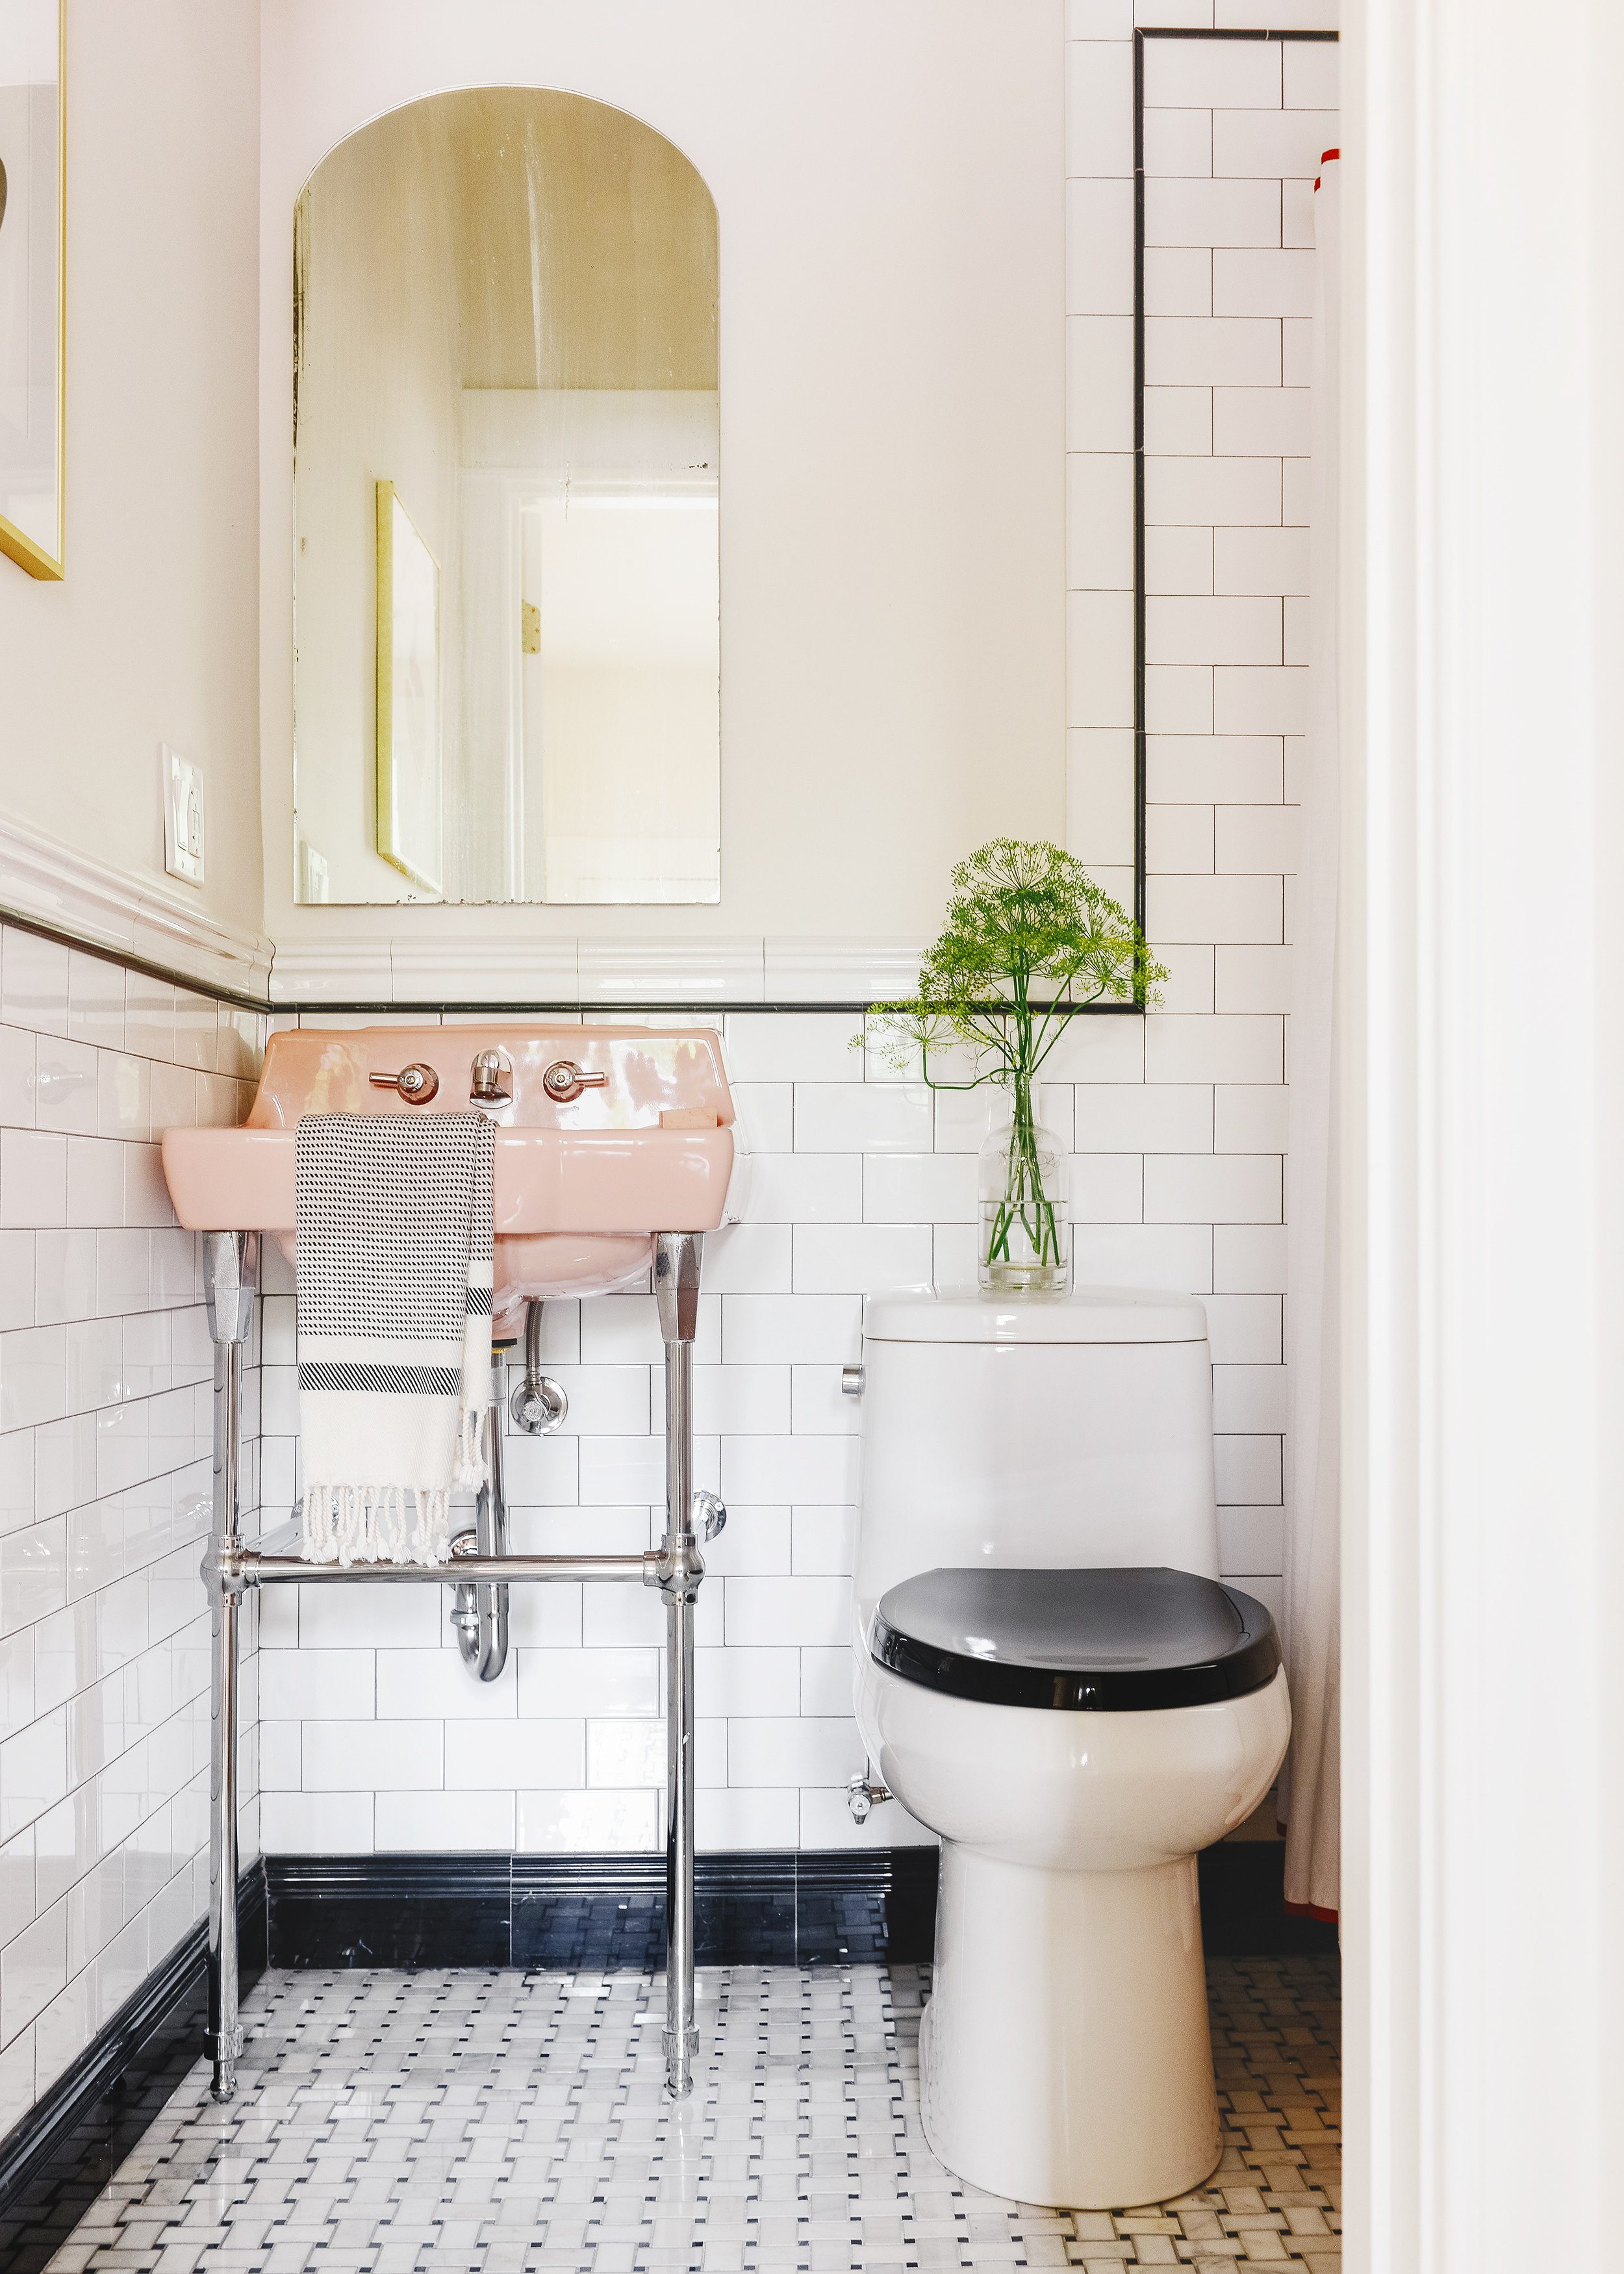 A small white bathroom with classic subway tile and a vintage pink bathtub | via Yellow Brick Home